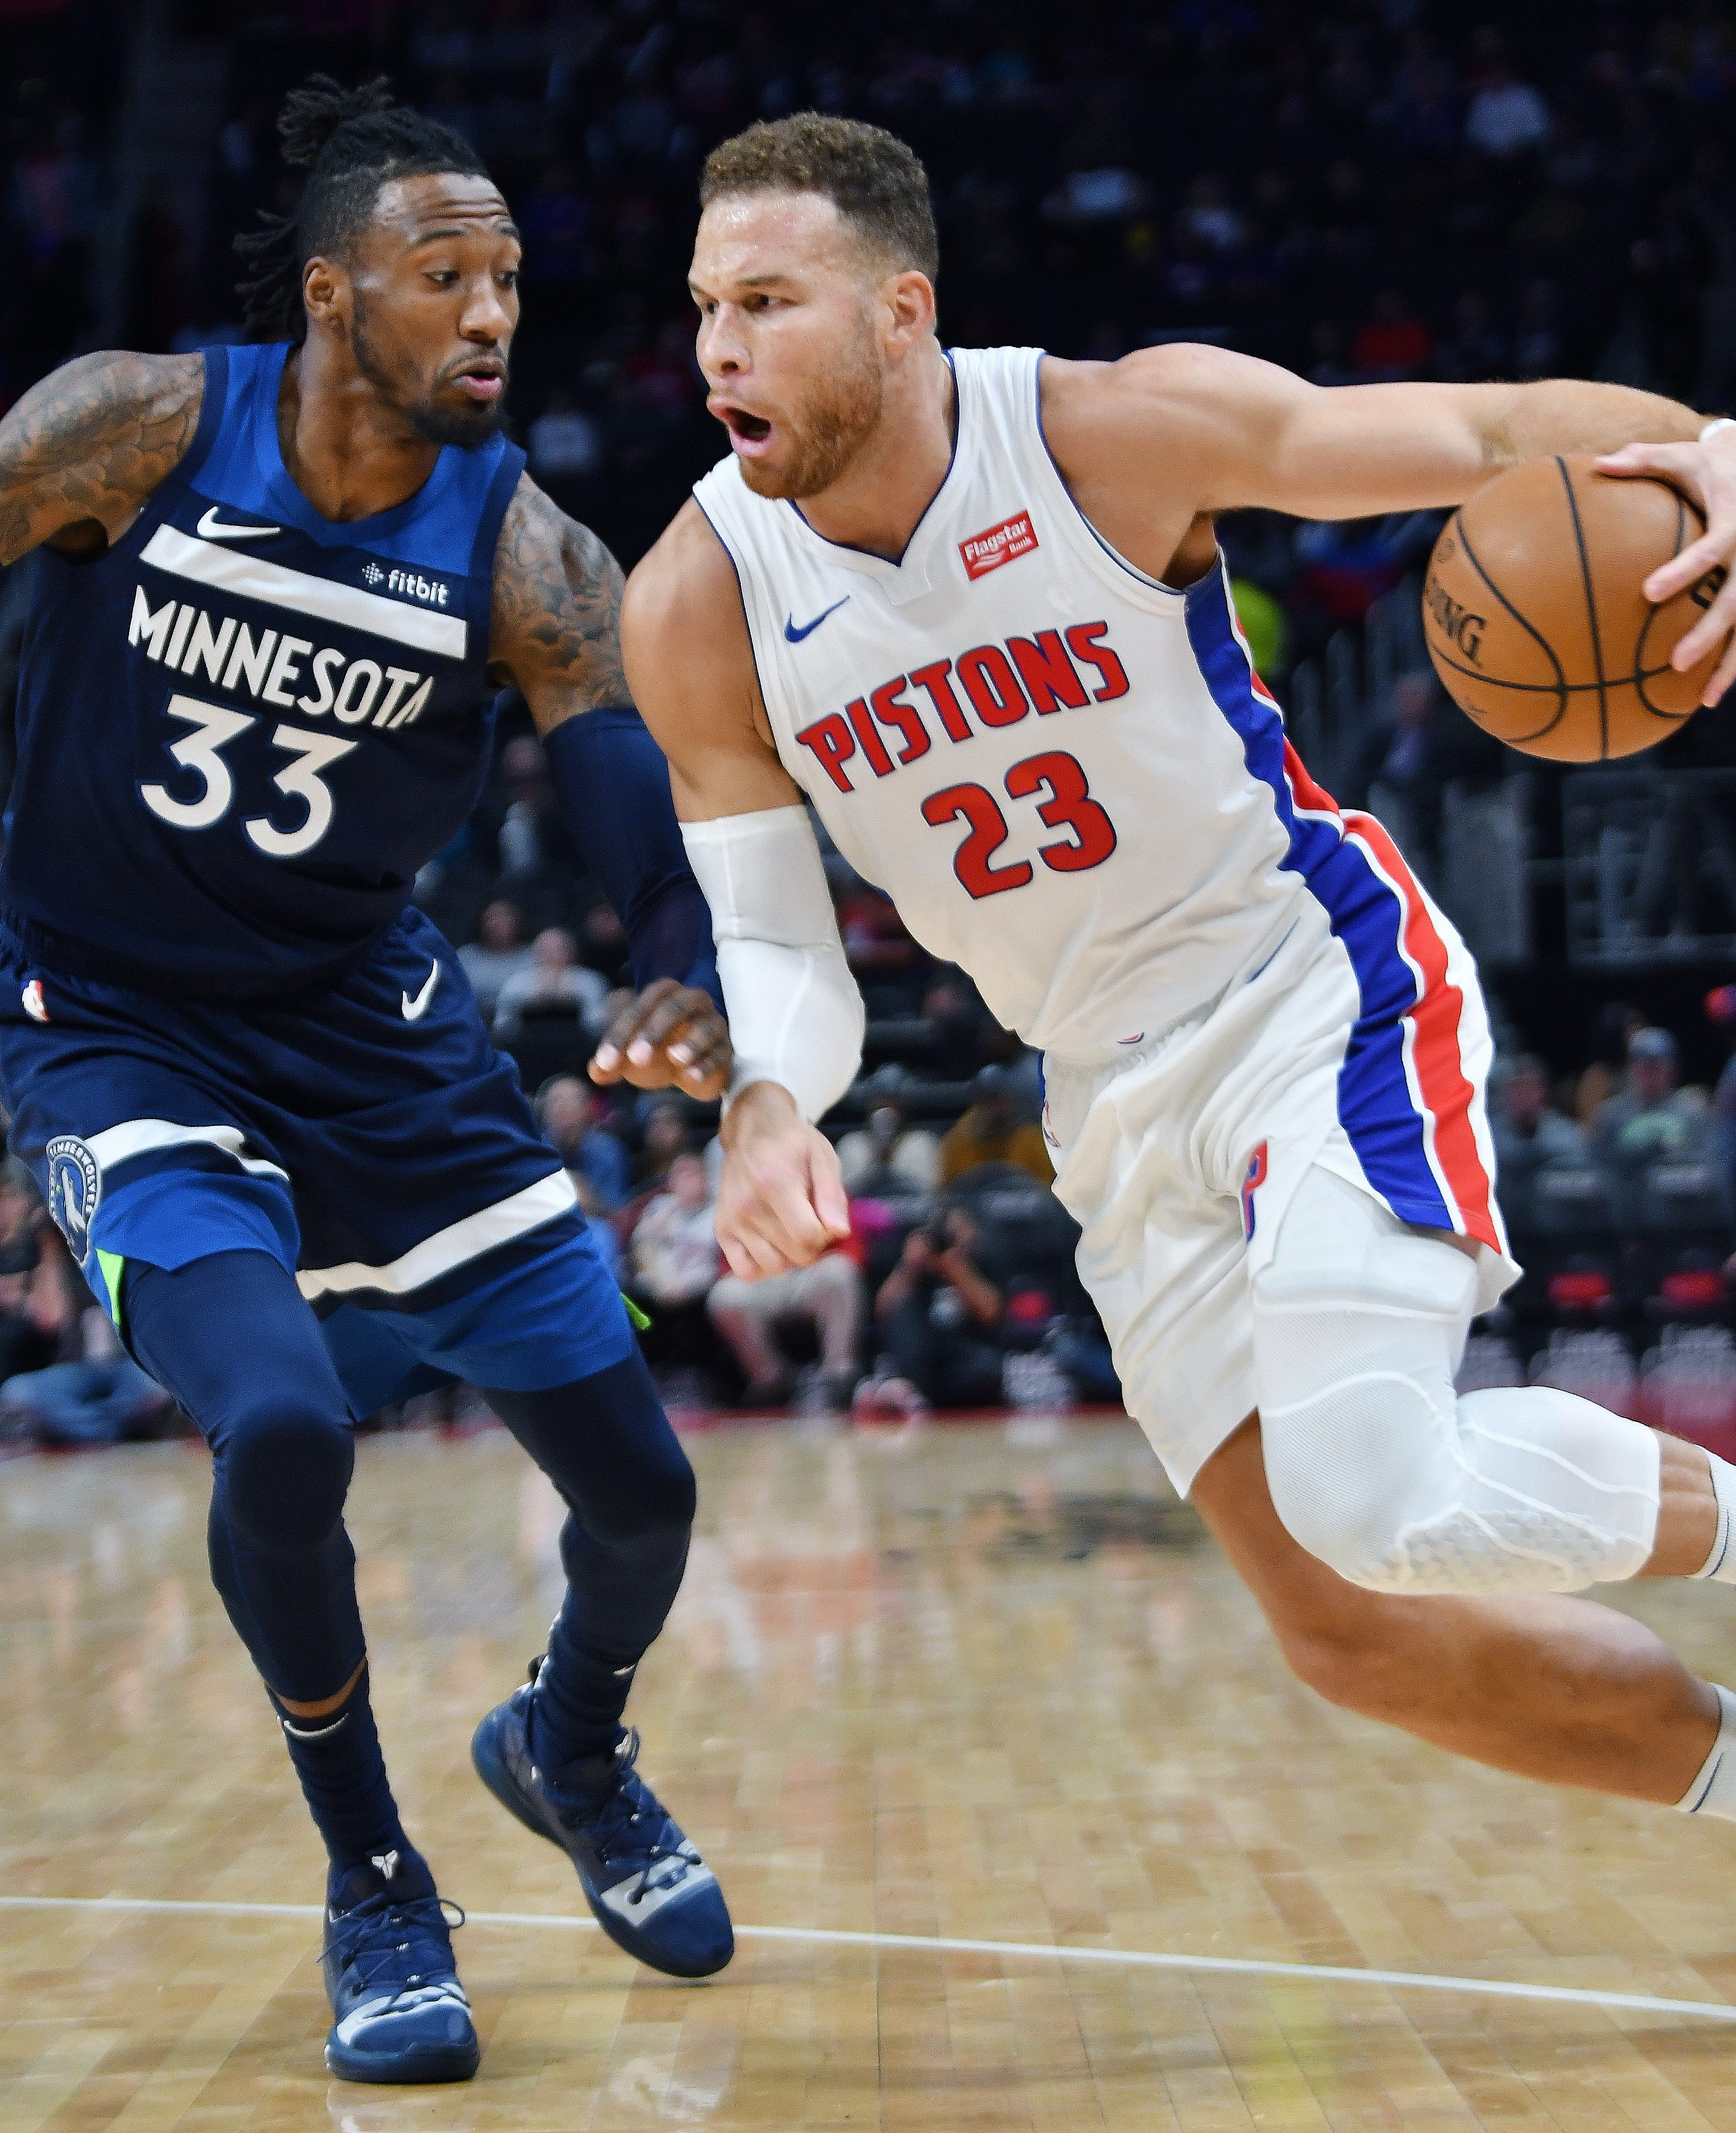 Pistons' Blake Griffin drives around Timberwolves' Robert Covington in the second quarter.